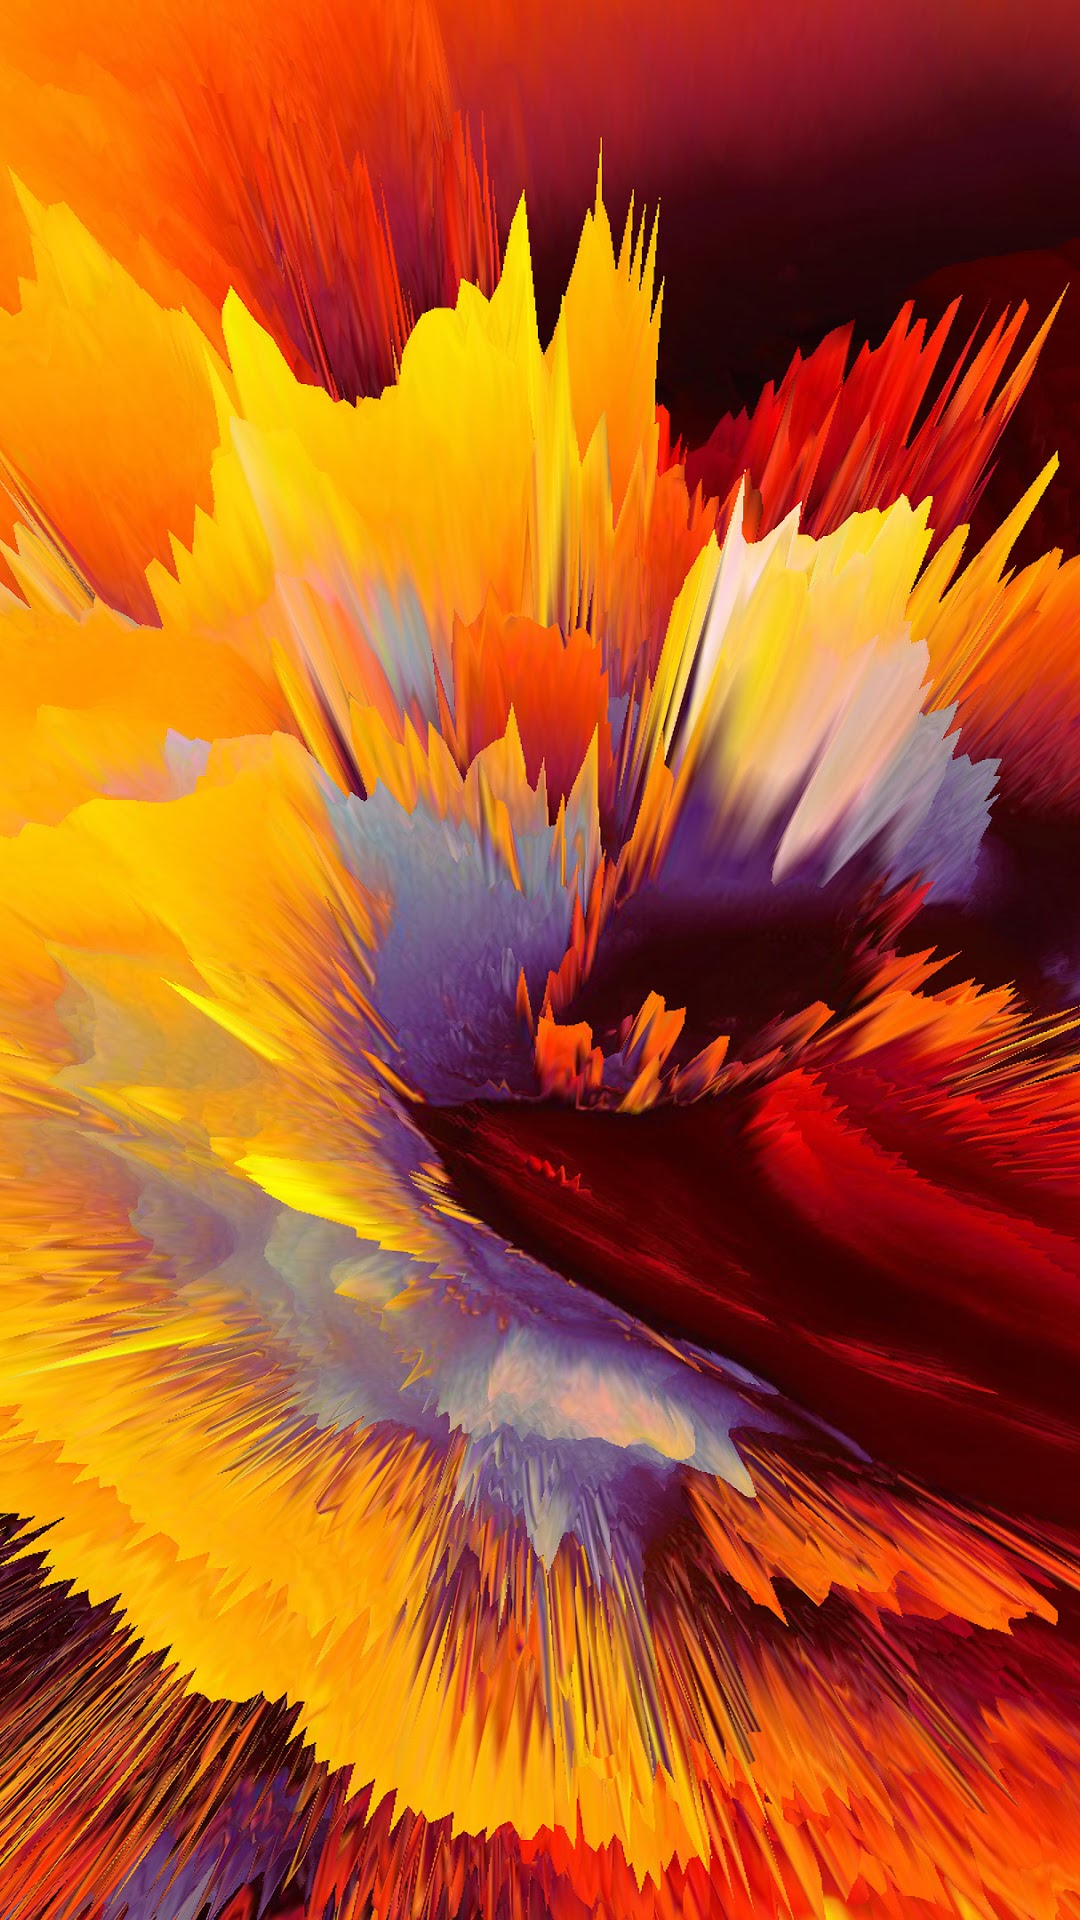 Abstract Colorful Explosion 4k 3840x2160 Smartphone Wallpaper 4k